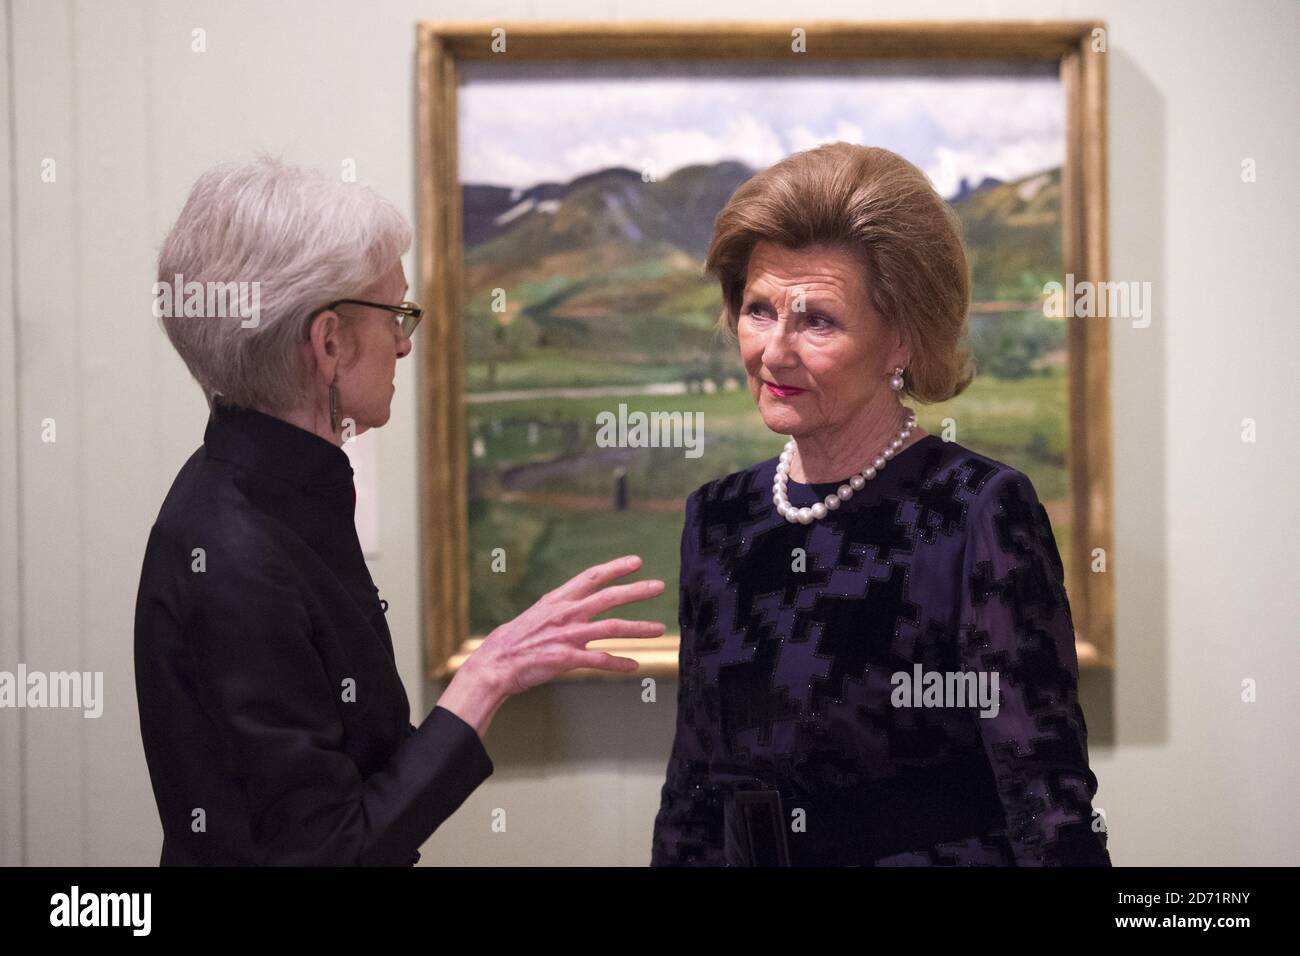 Her Majesty Queen Sonja of Norway pictured with curator MaryAnne Stevens, during a visit to the Nikolai Astrup exhibition, at Dulwich Picture Gallery in south London. Stock Photo